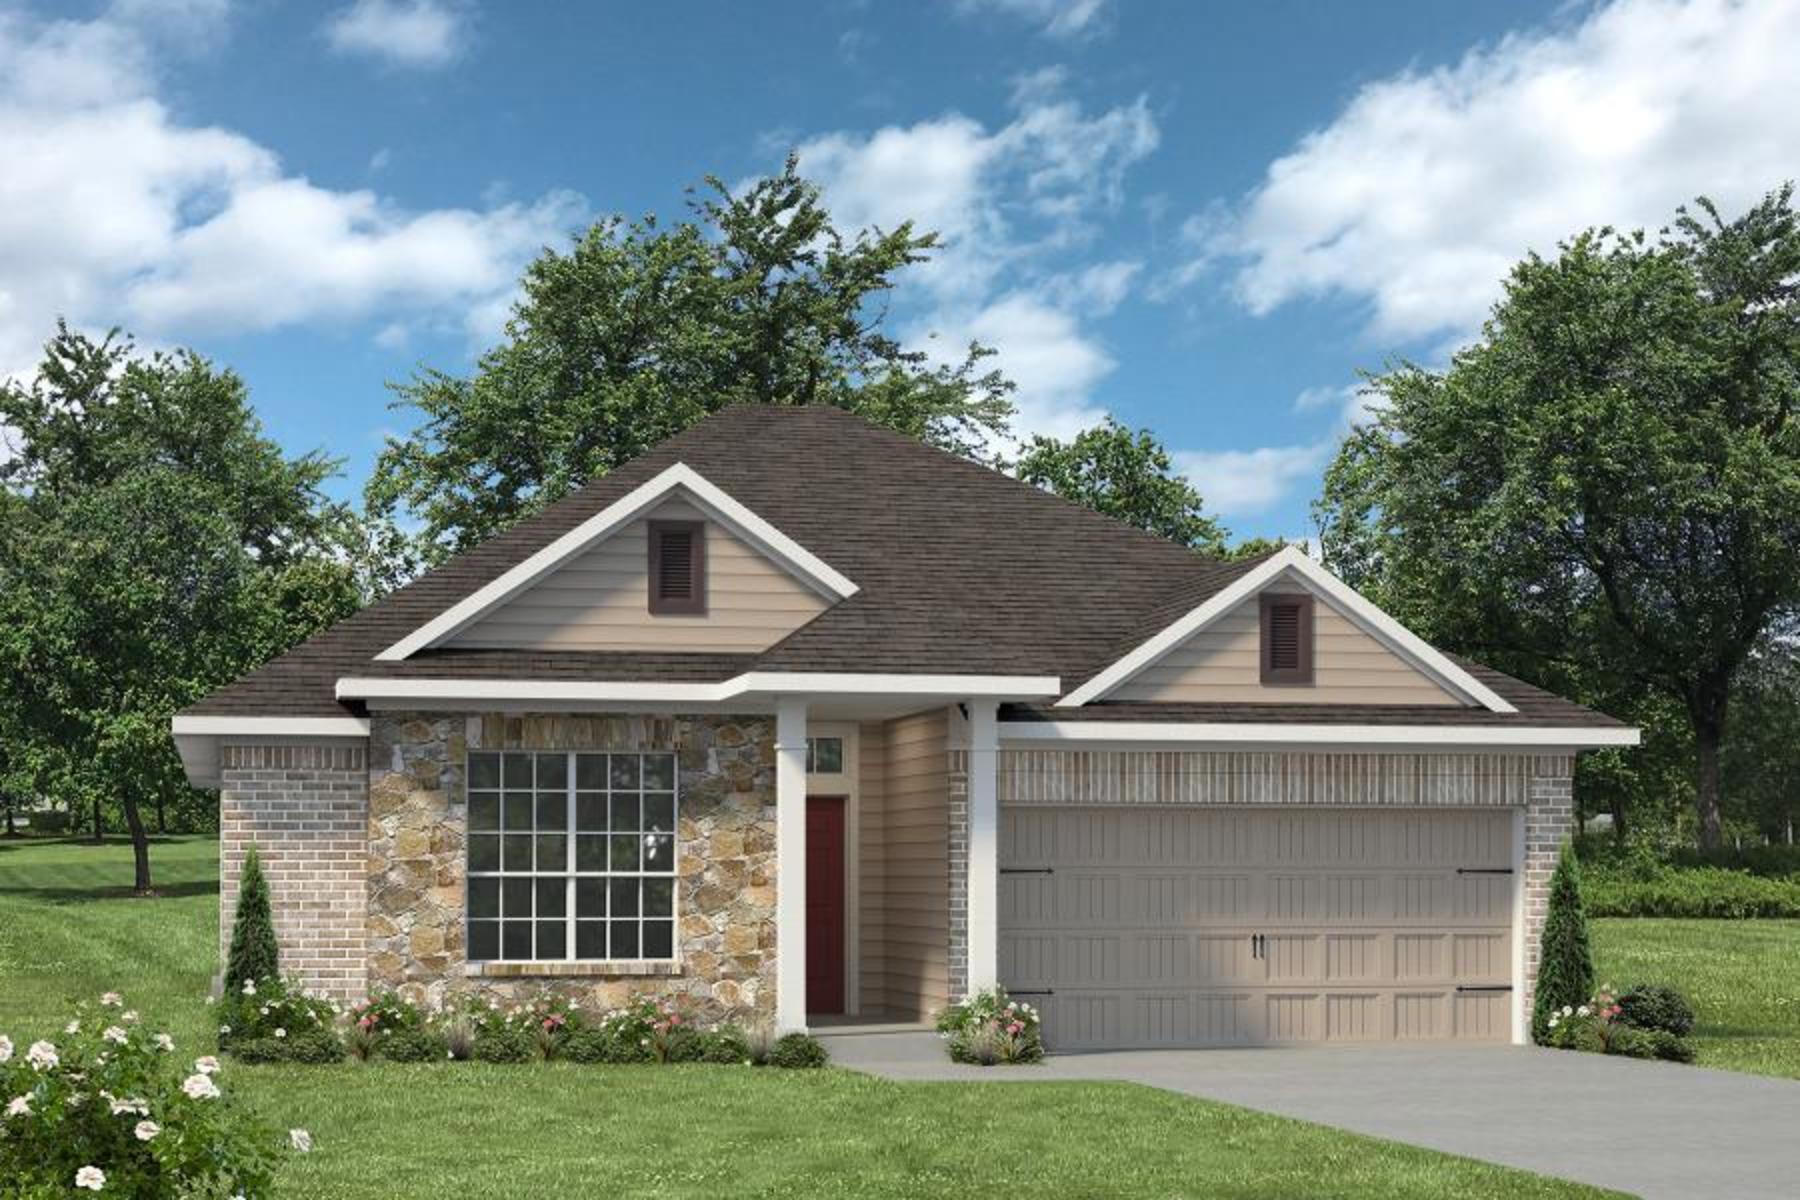 https://myhome.anewgo.com/client/stylecraft/community/Our%20Plans/plan/1514?elevId=23. Bedford Home with 3 Bedrooms